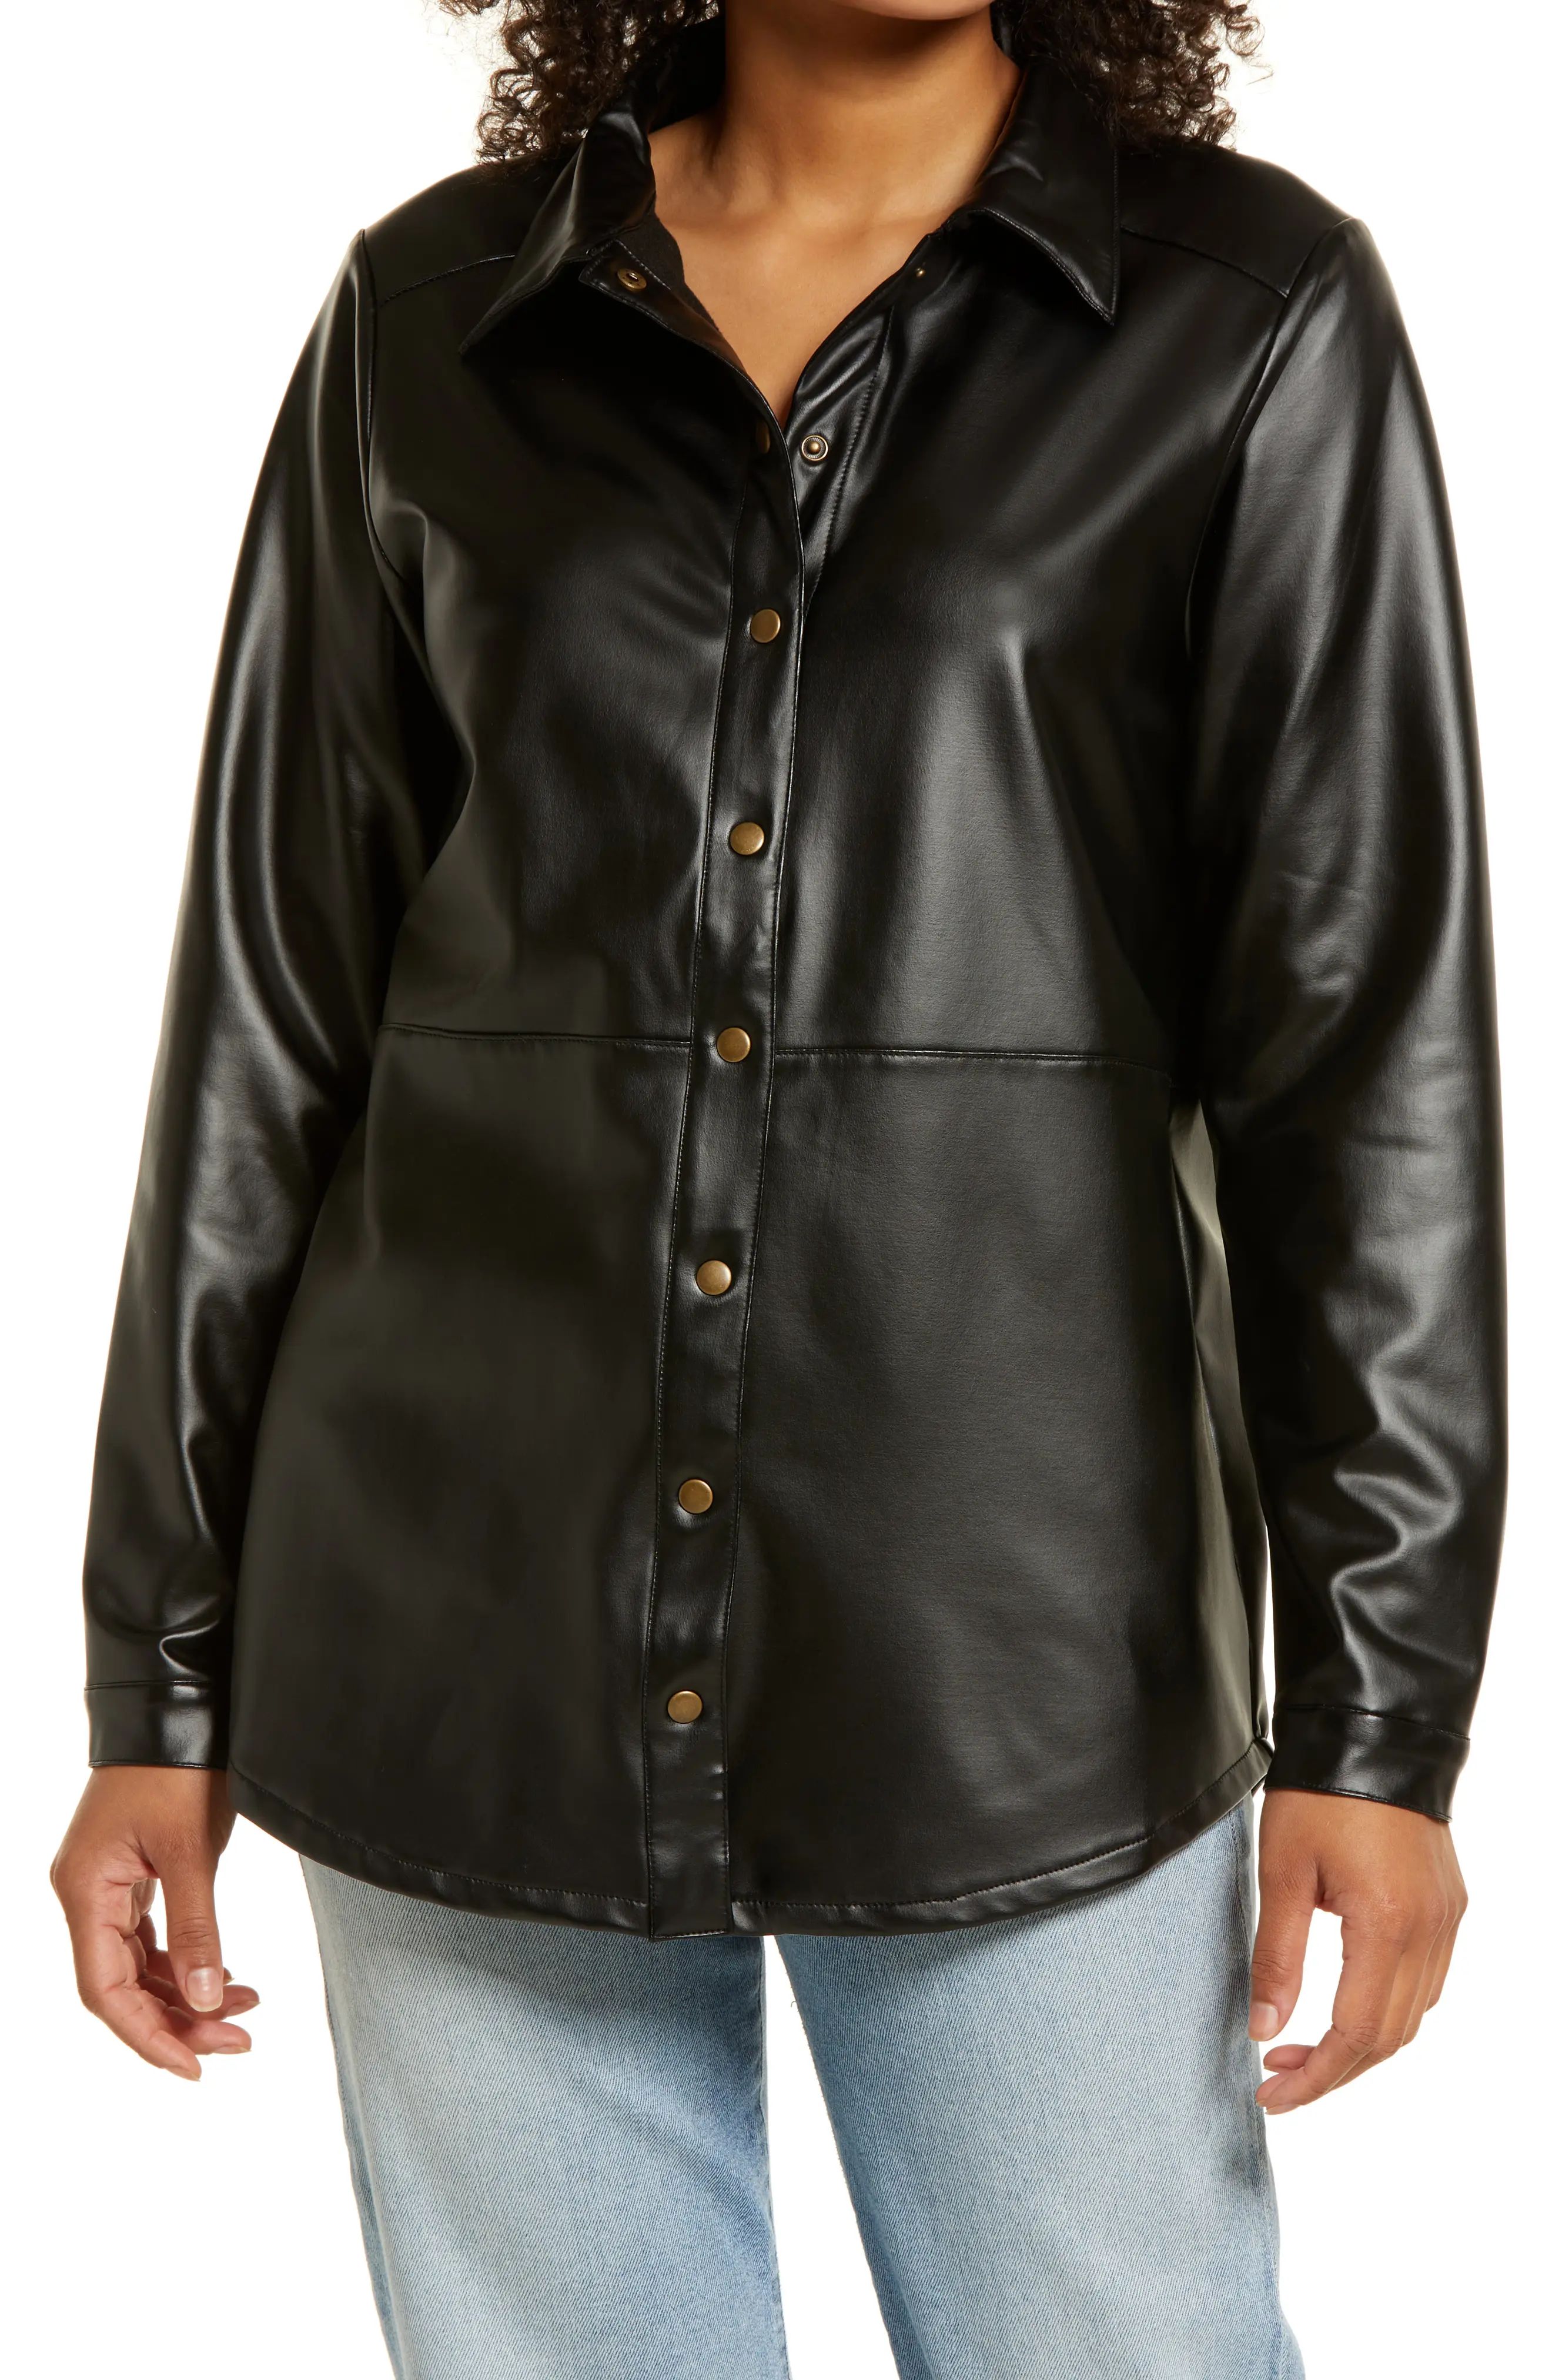 Bobeau Faux Leather Shirt in Black at Nordstrom, Size X-Small | Nordstrom